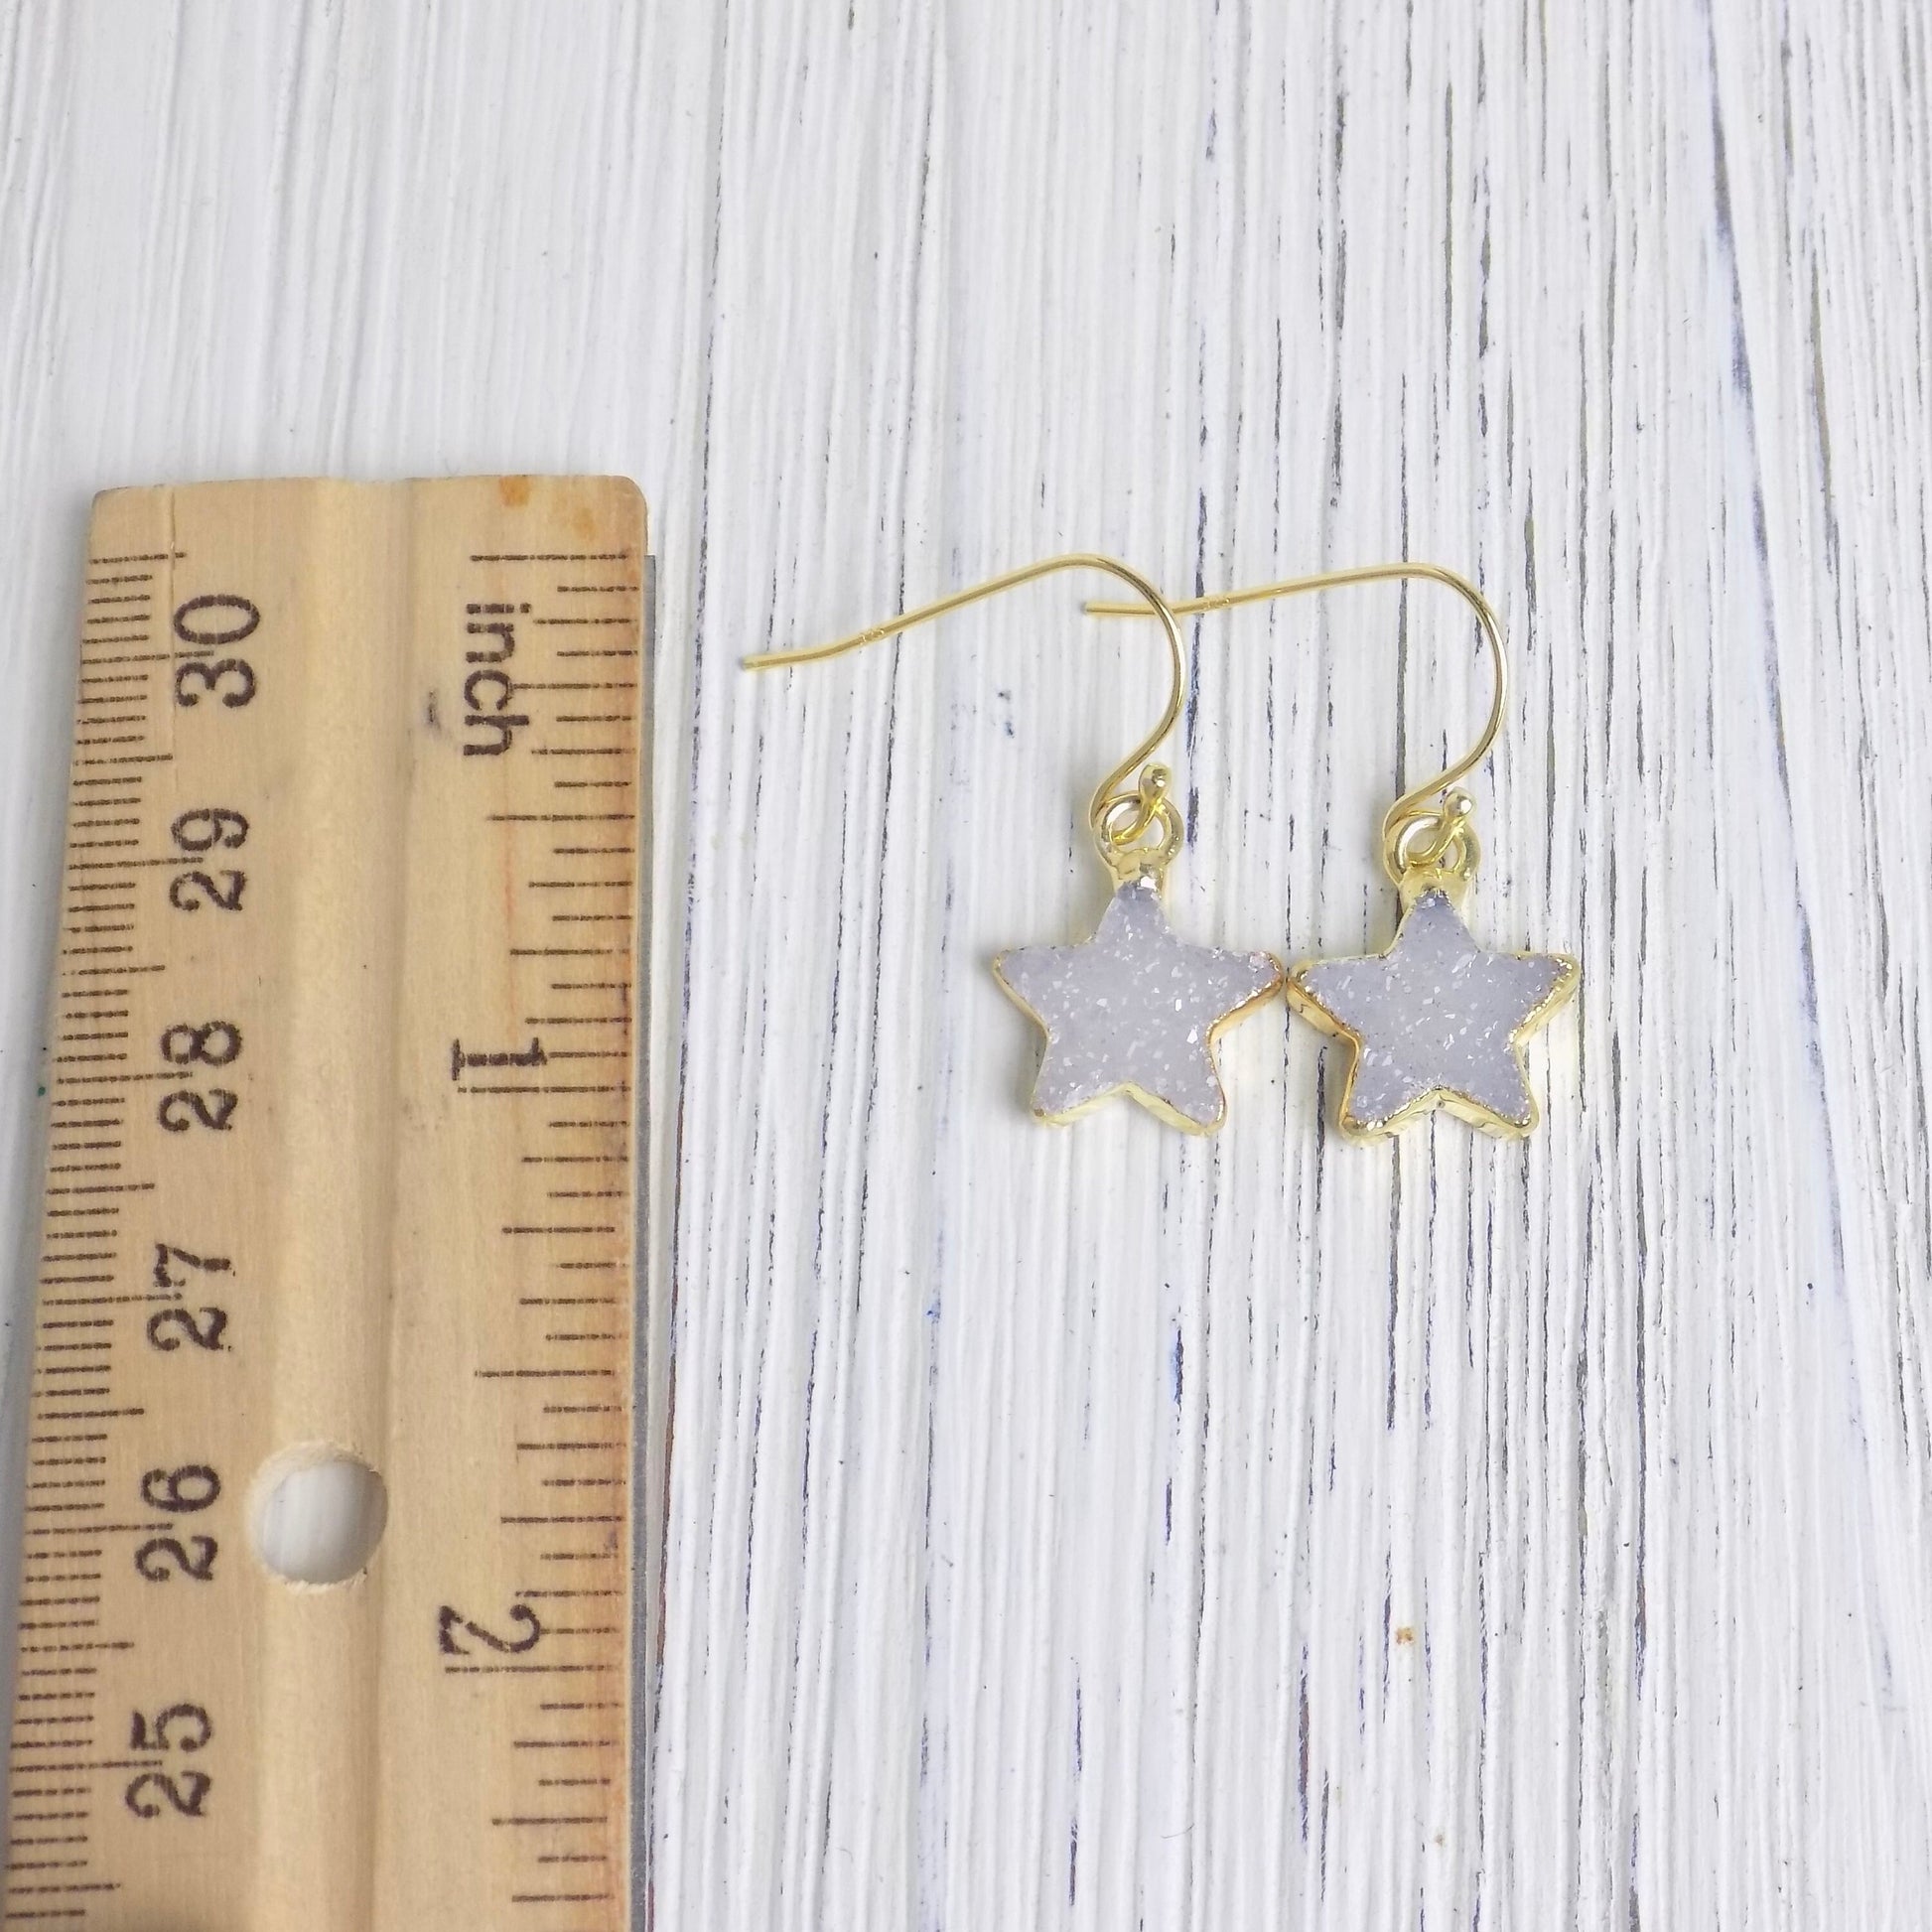 Gifts For Her, Small Star Druzy Drop Earrings Gold Dipped Sparkly, R11-10